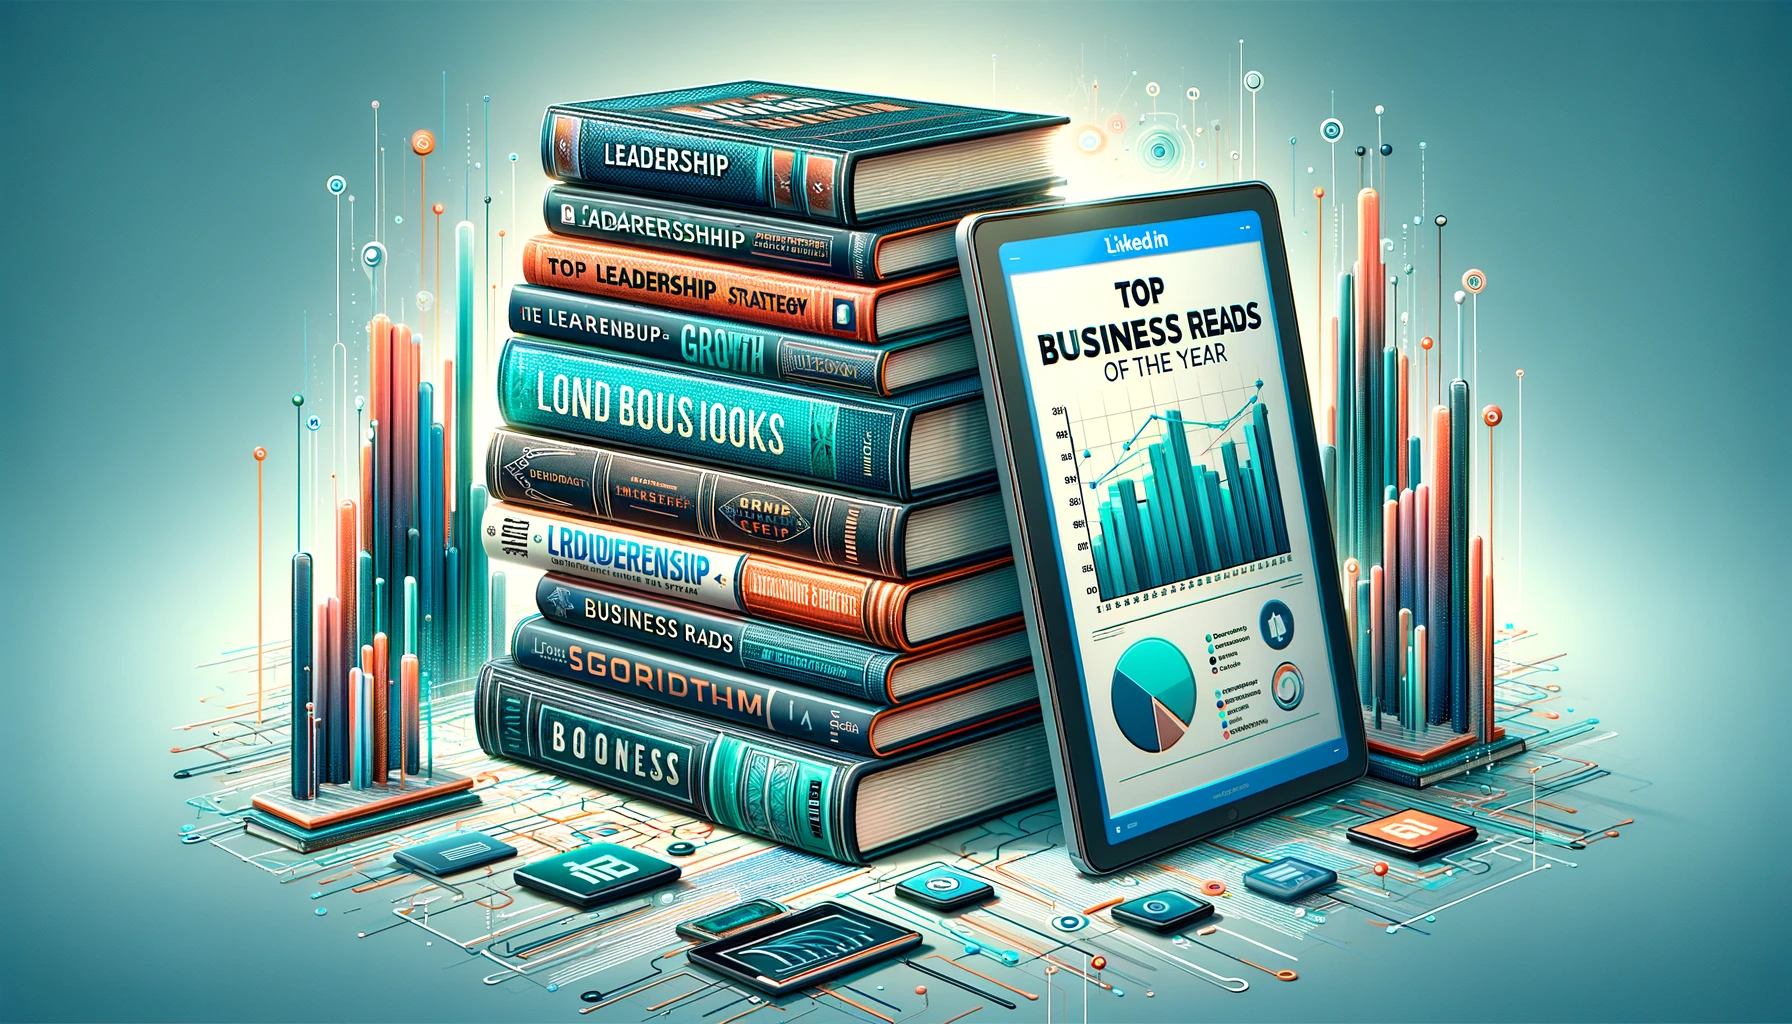 Image of a bunch of business books stacked on eachother